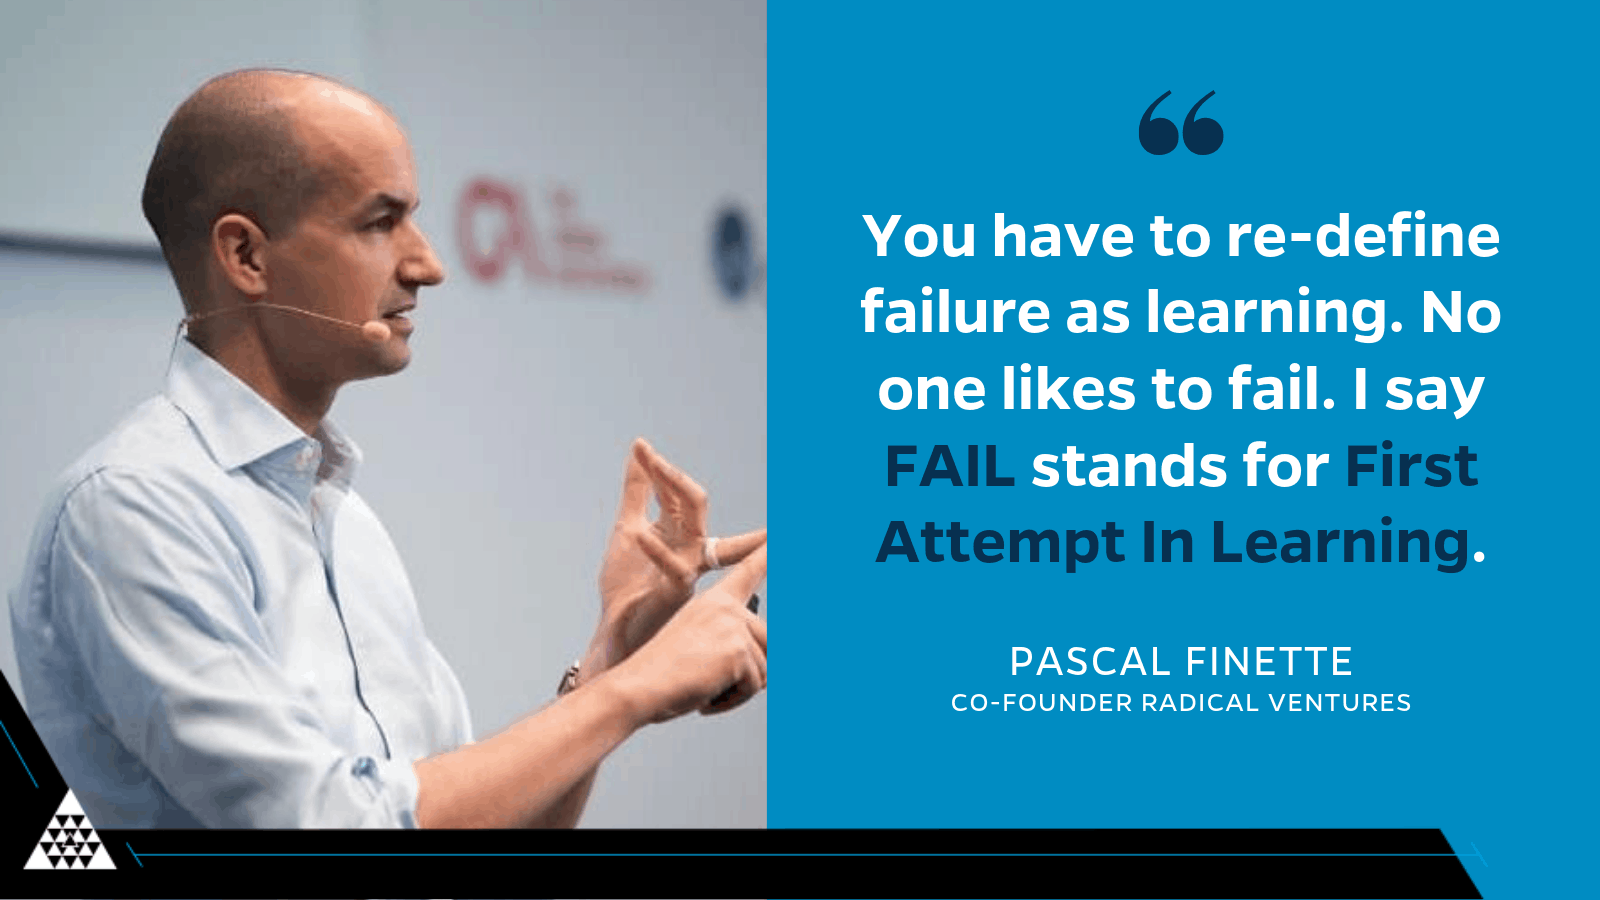 Pascal Finette - FAIL stands for First Attempt In Learning